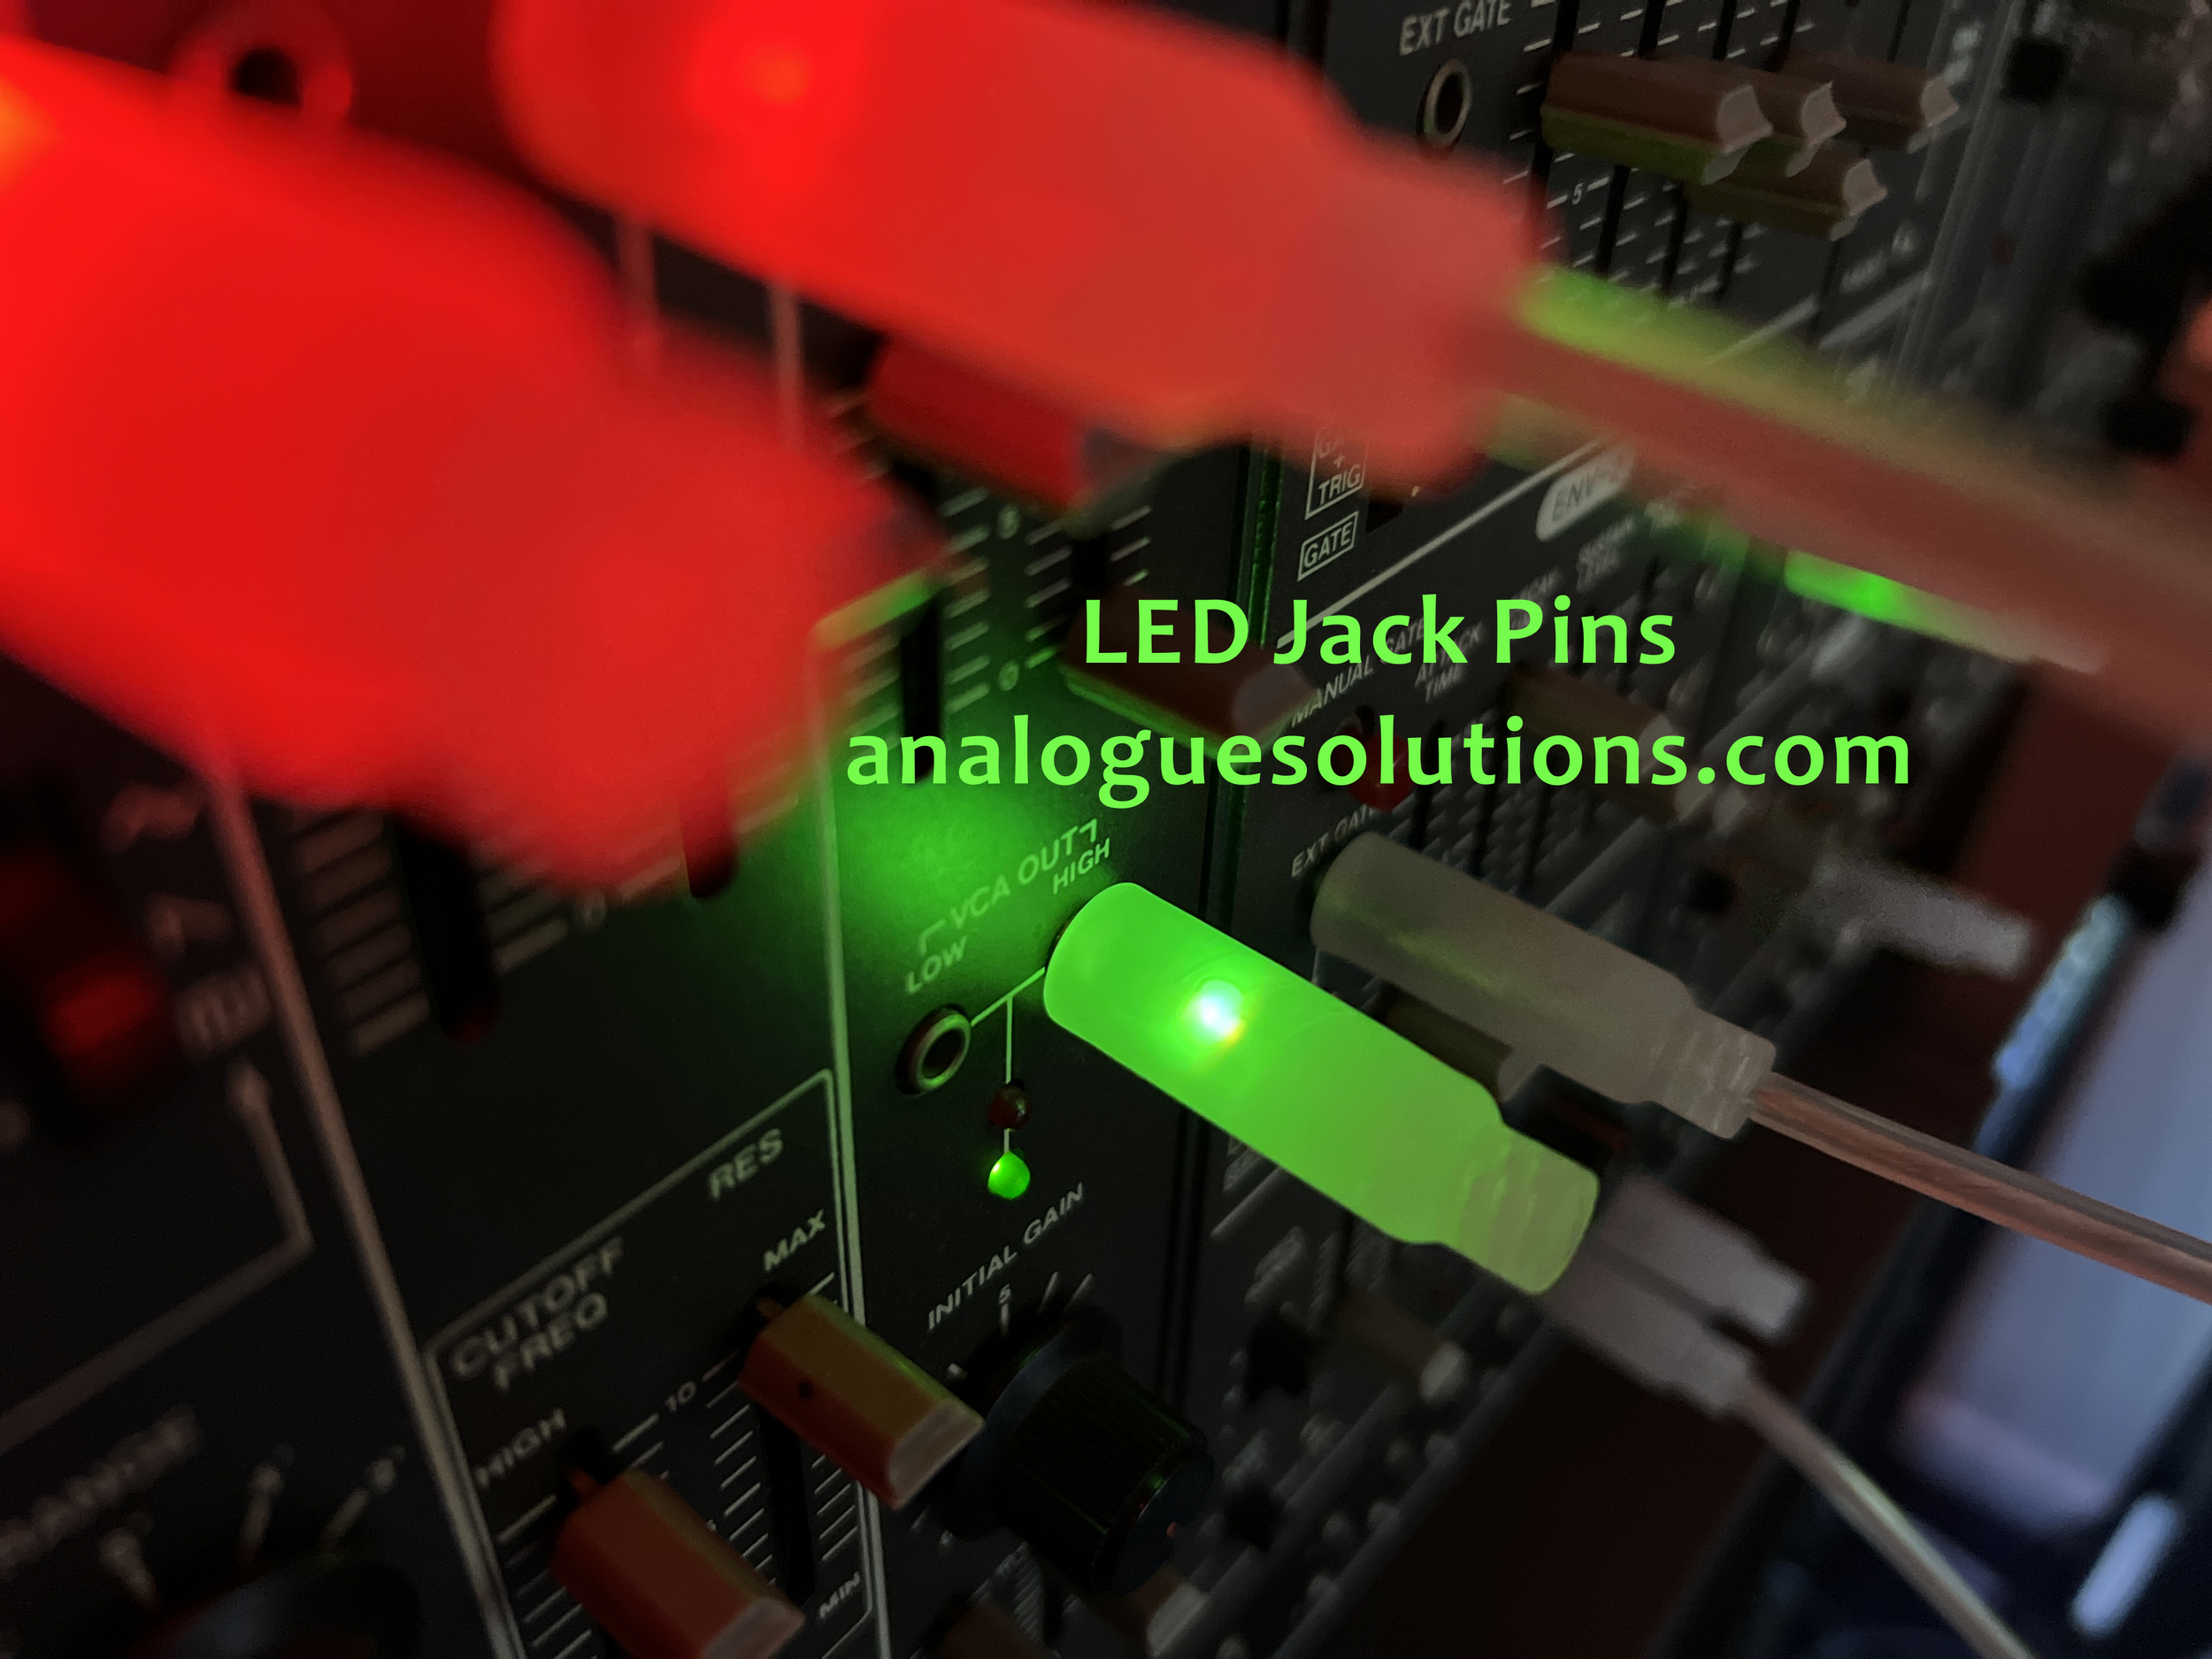 analogue solutions roland system 100m LED CV cables jack pins.png